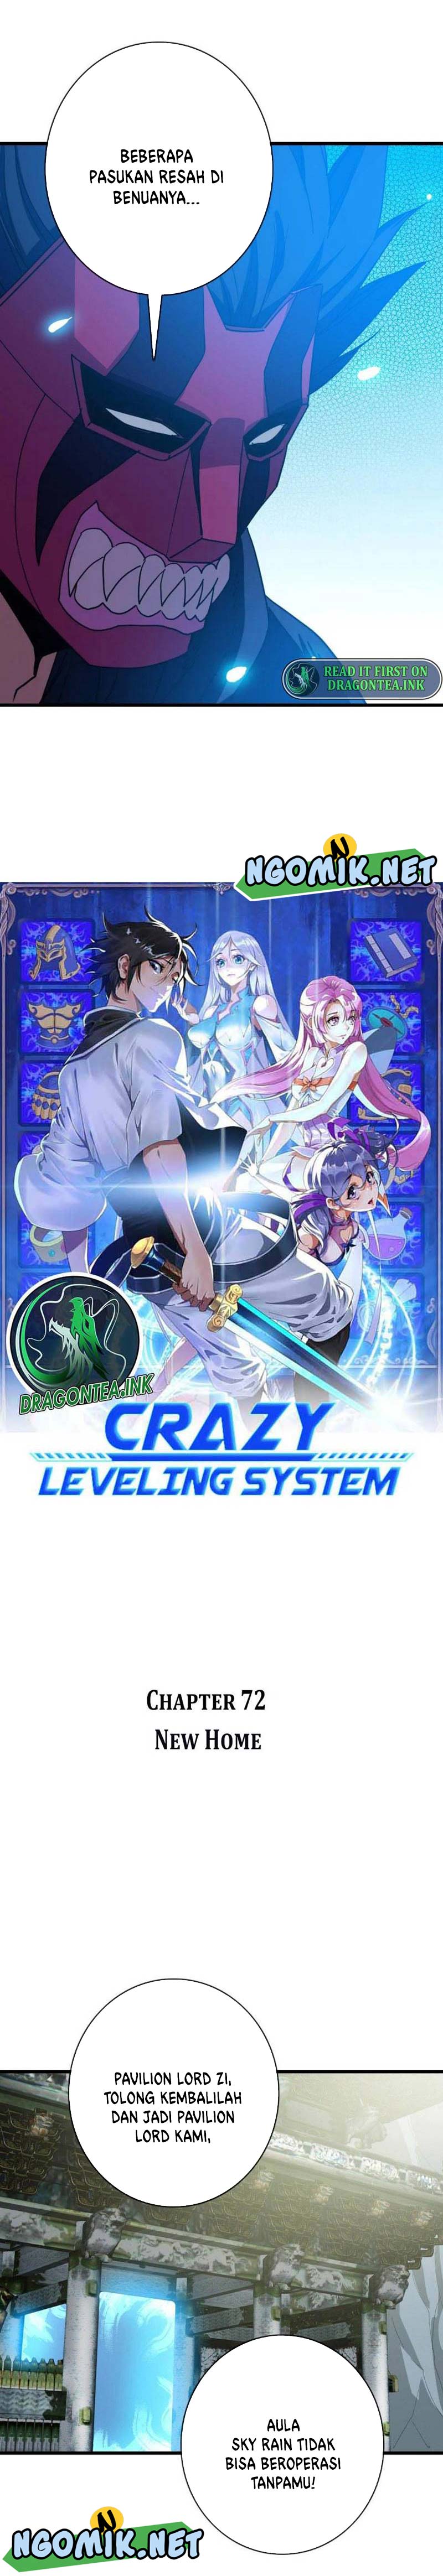 Crazy Leveling System Chapter 72